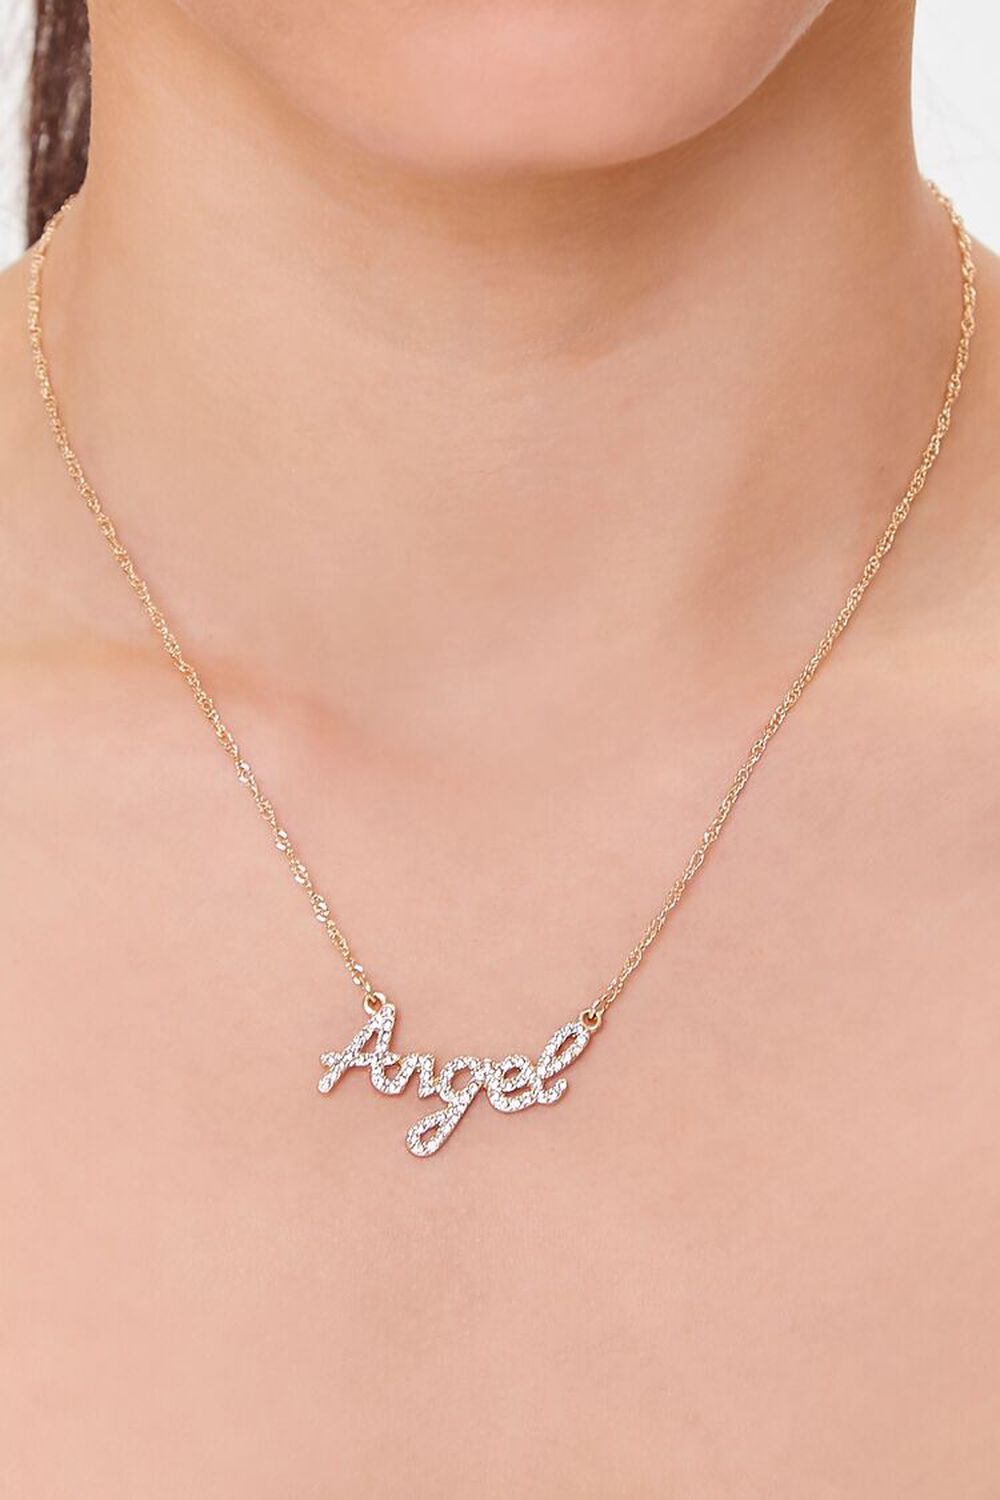 Angel Pendant Chain Necklace, image 1